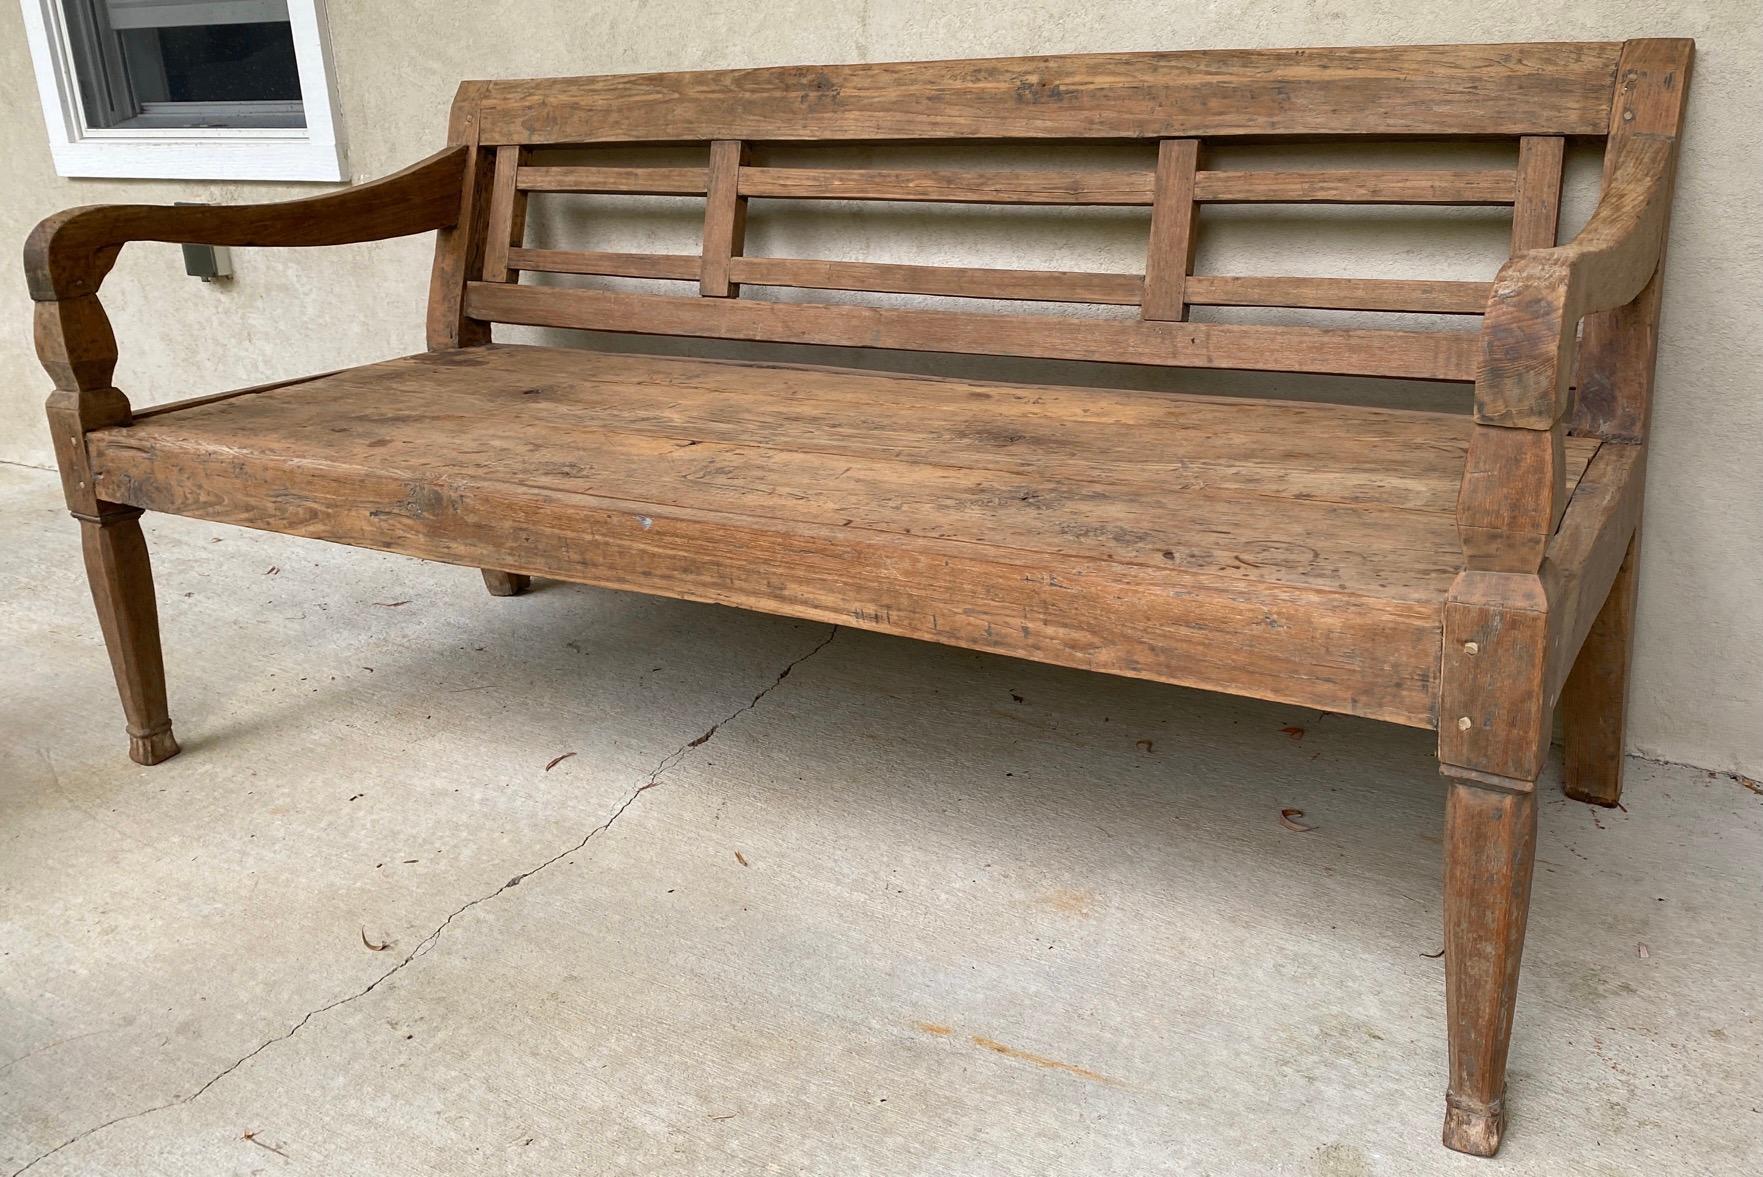 This bench is made of solid teak wood and generally comes from farms developed by Dutch settlers in the early 20th century. Size of this bench allows above average size people to seat comfortably or used to recline for afternoon rest and relaxation.